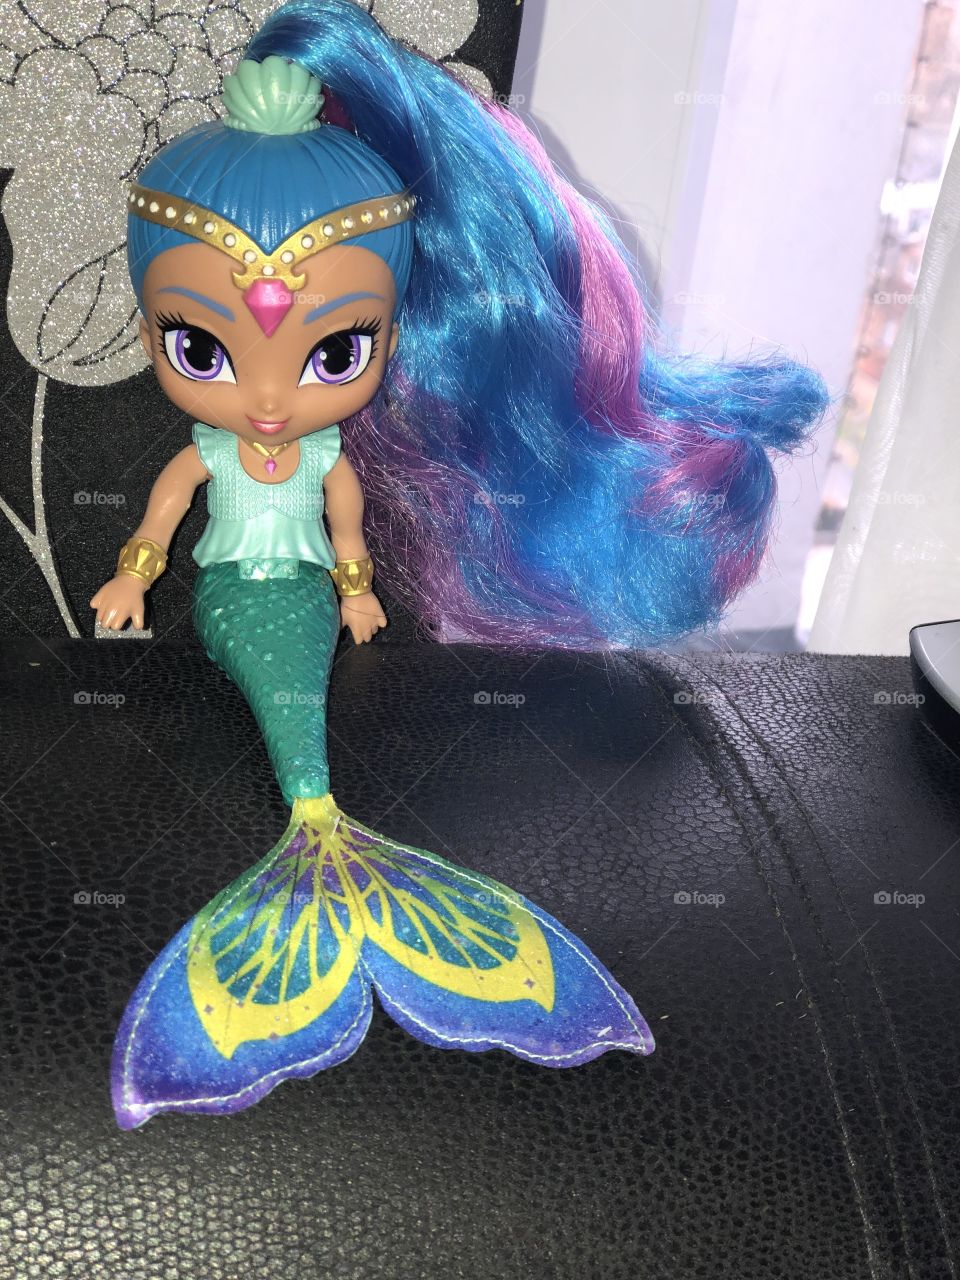 My daughter first ever doll, lovely mermaid and very colourful, good to play in the bath with.